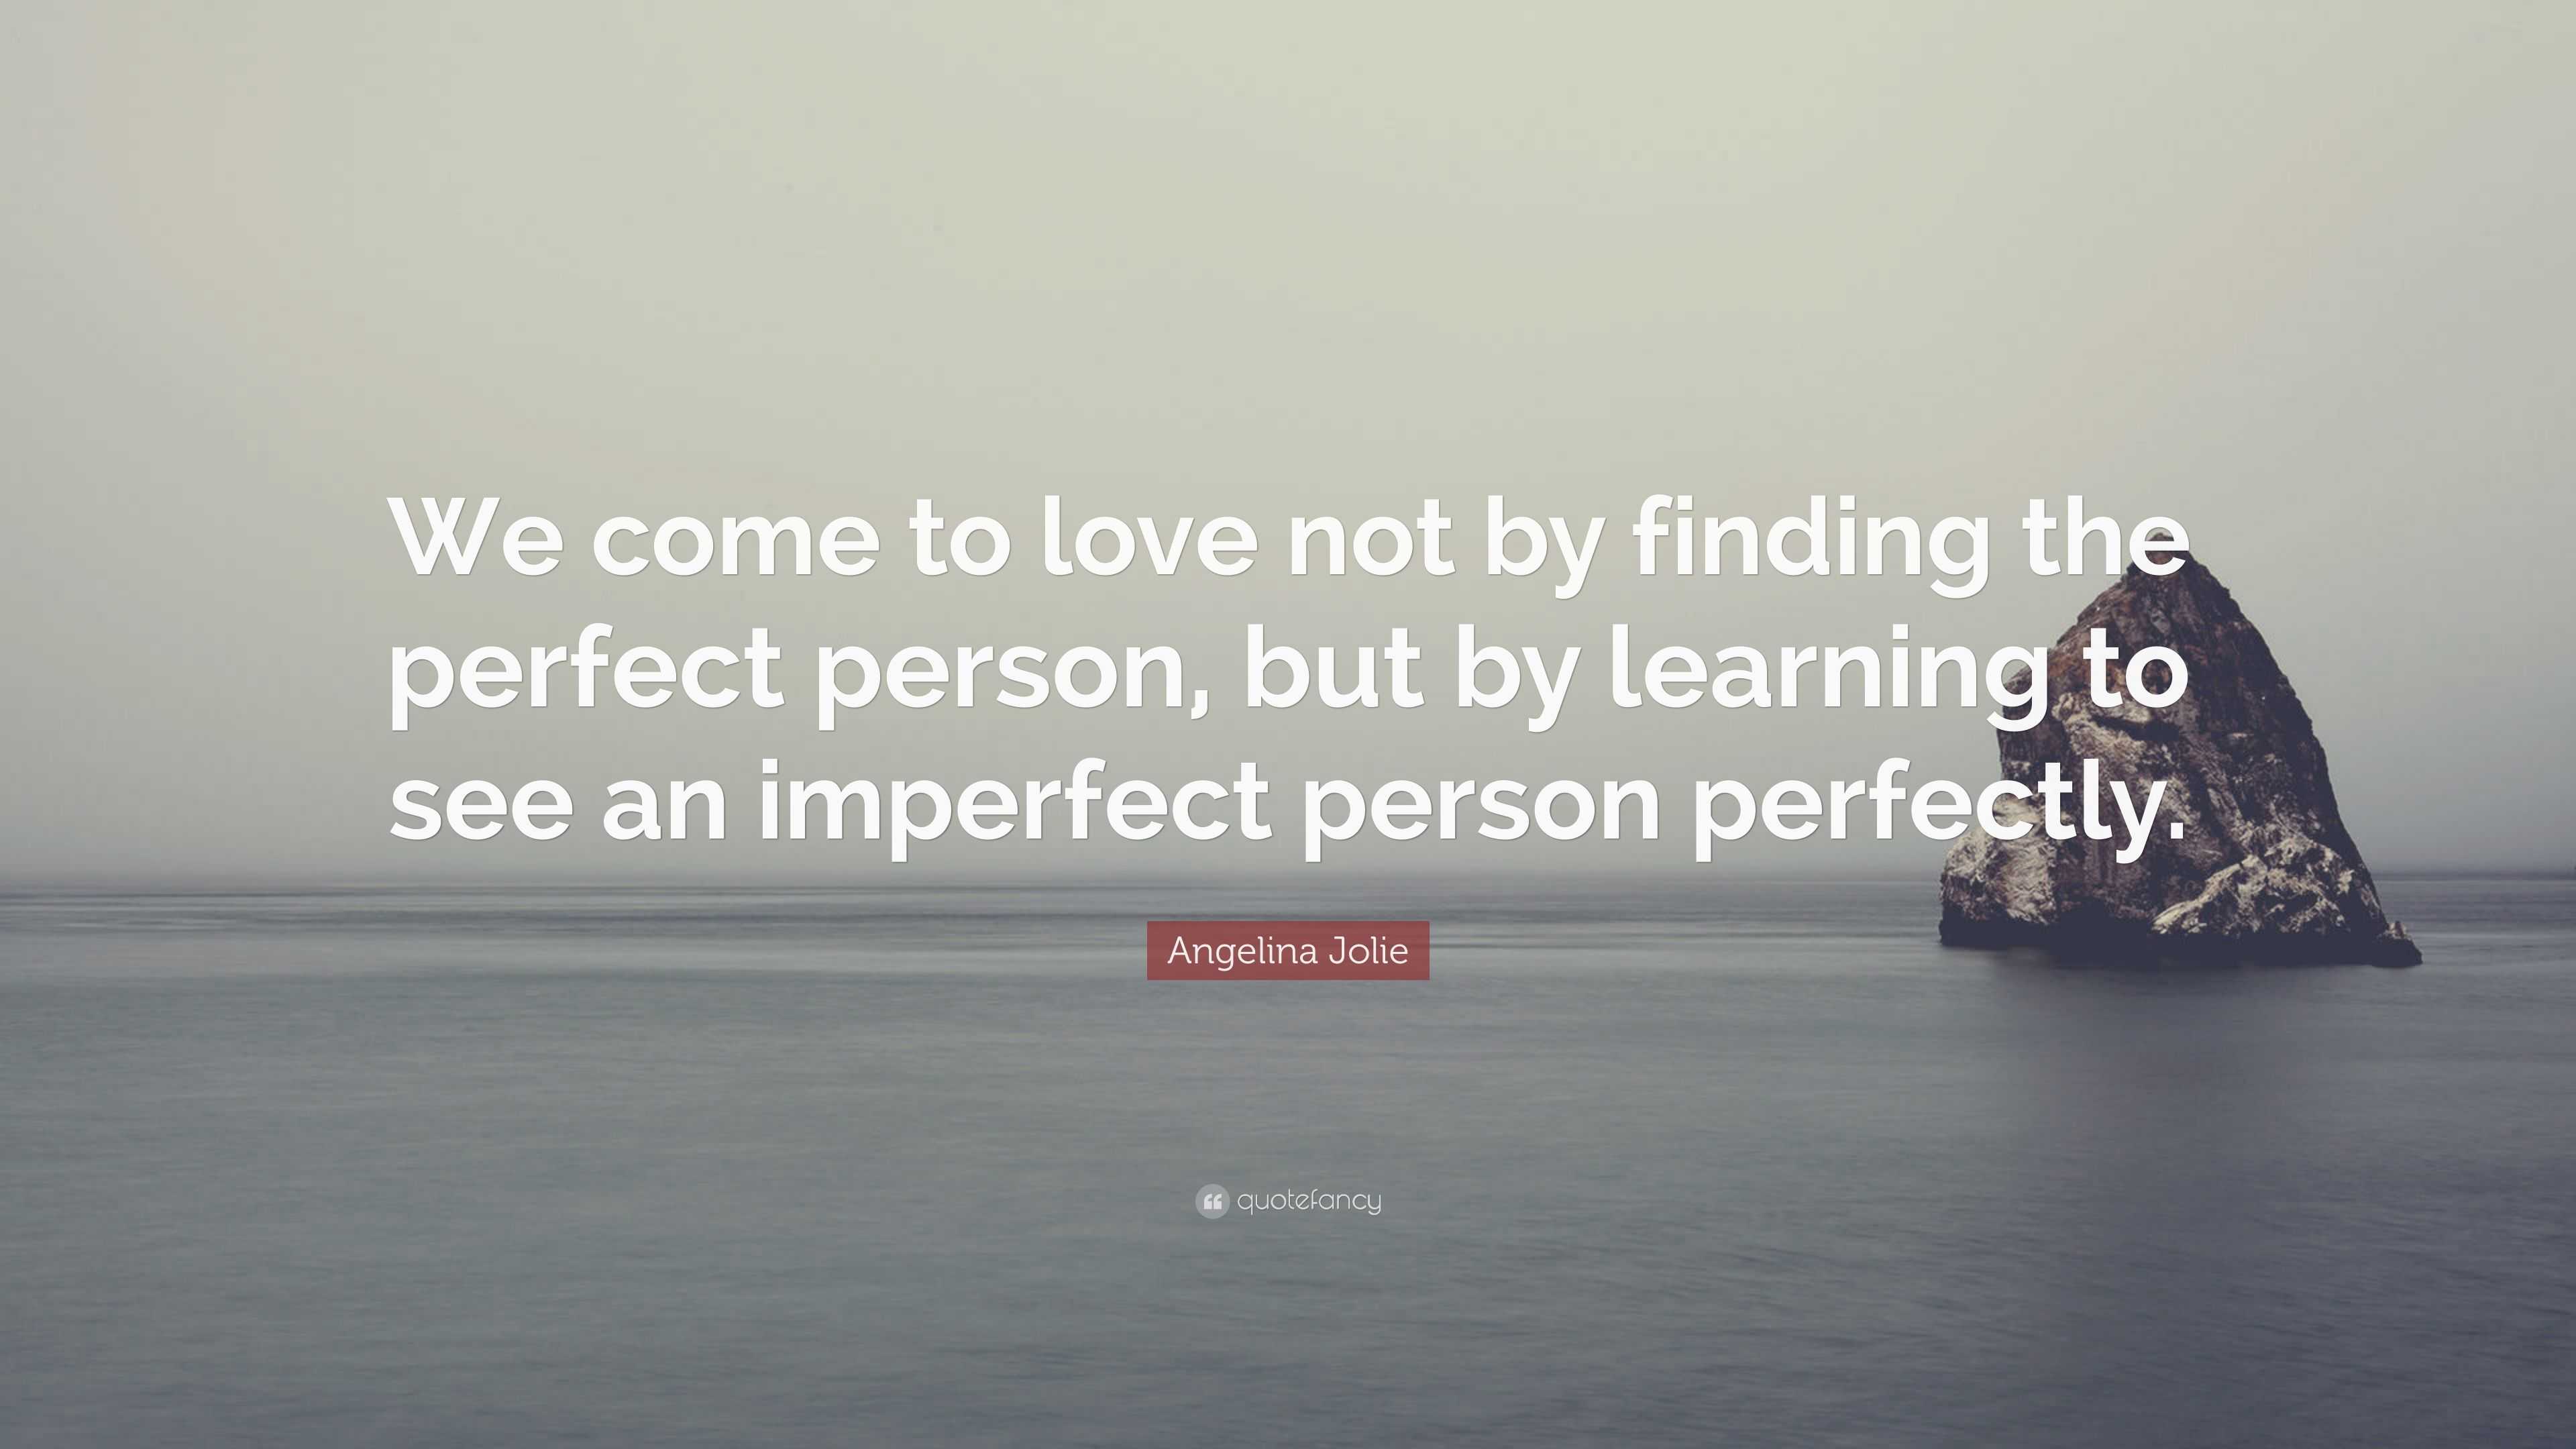 Angelina Jolie Quote: “We come to love not by finding the perfect person,  but by learning